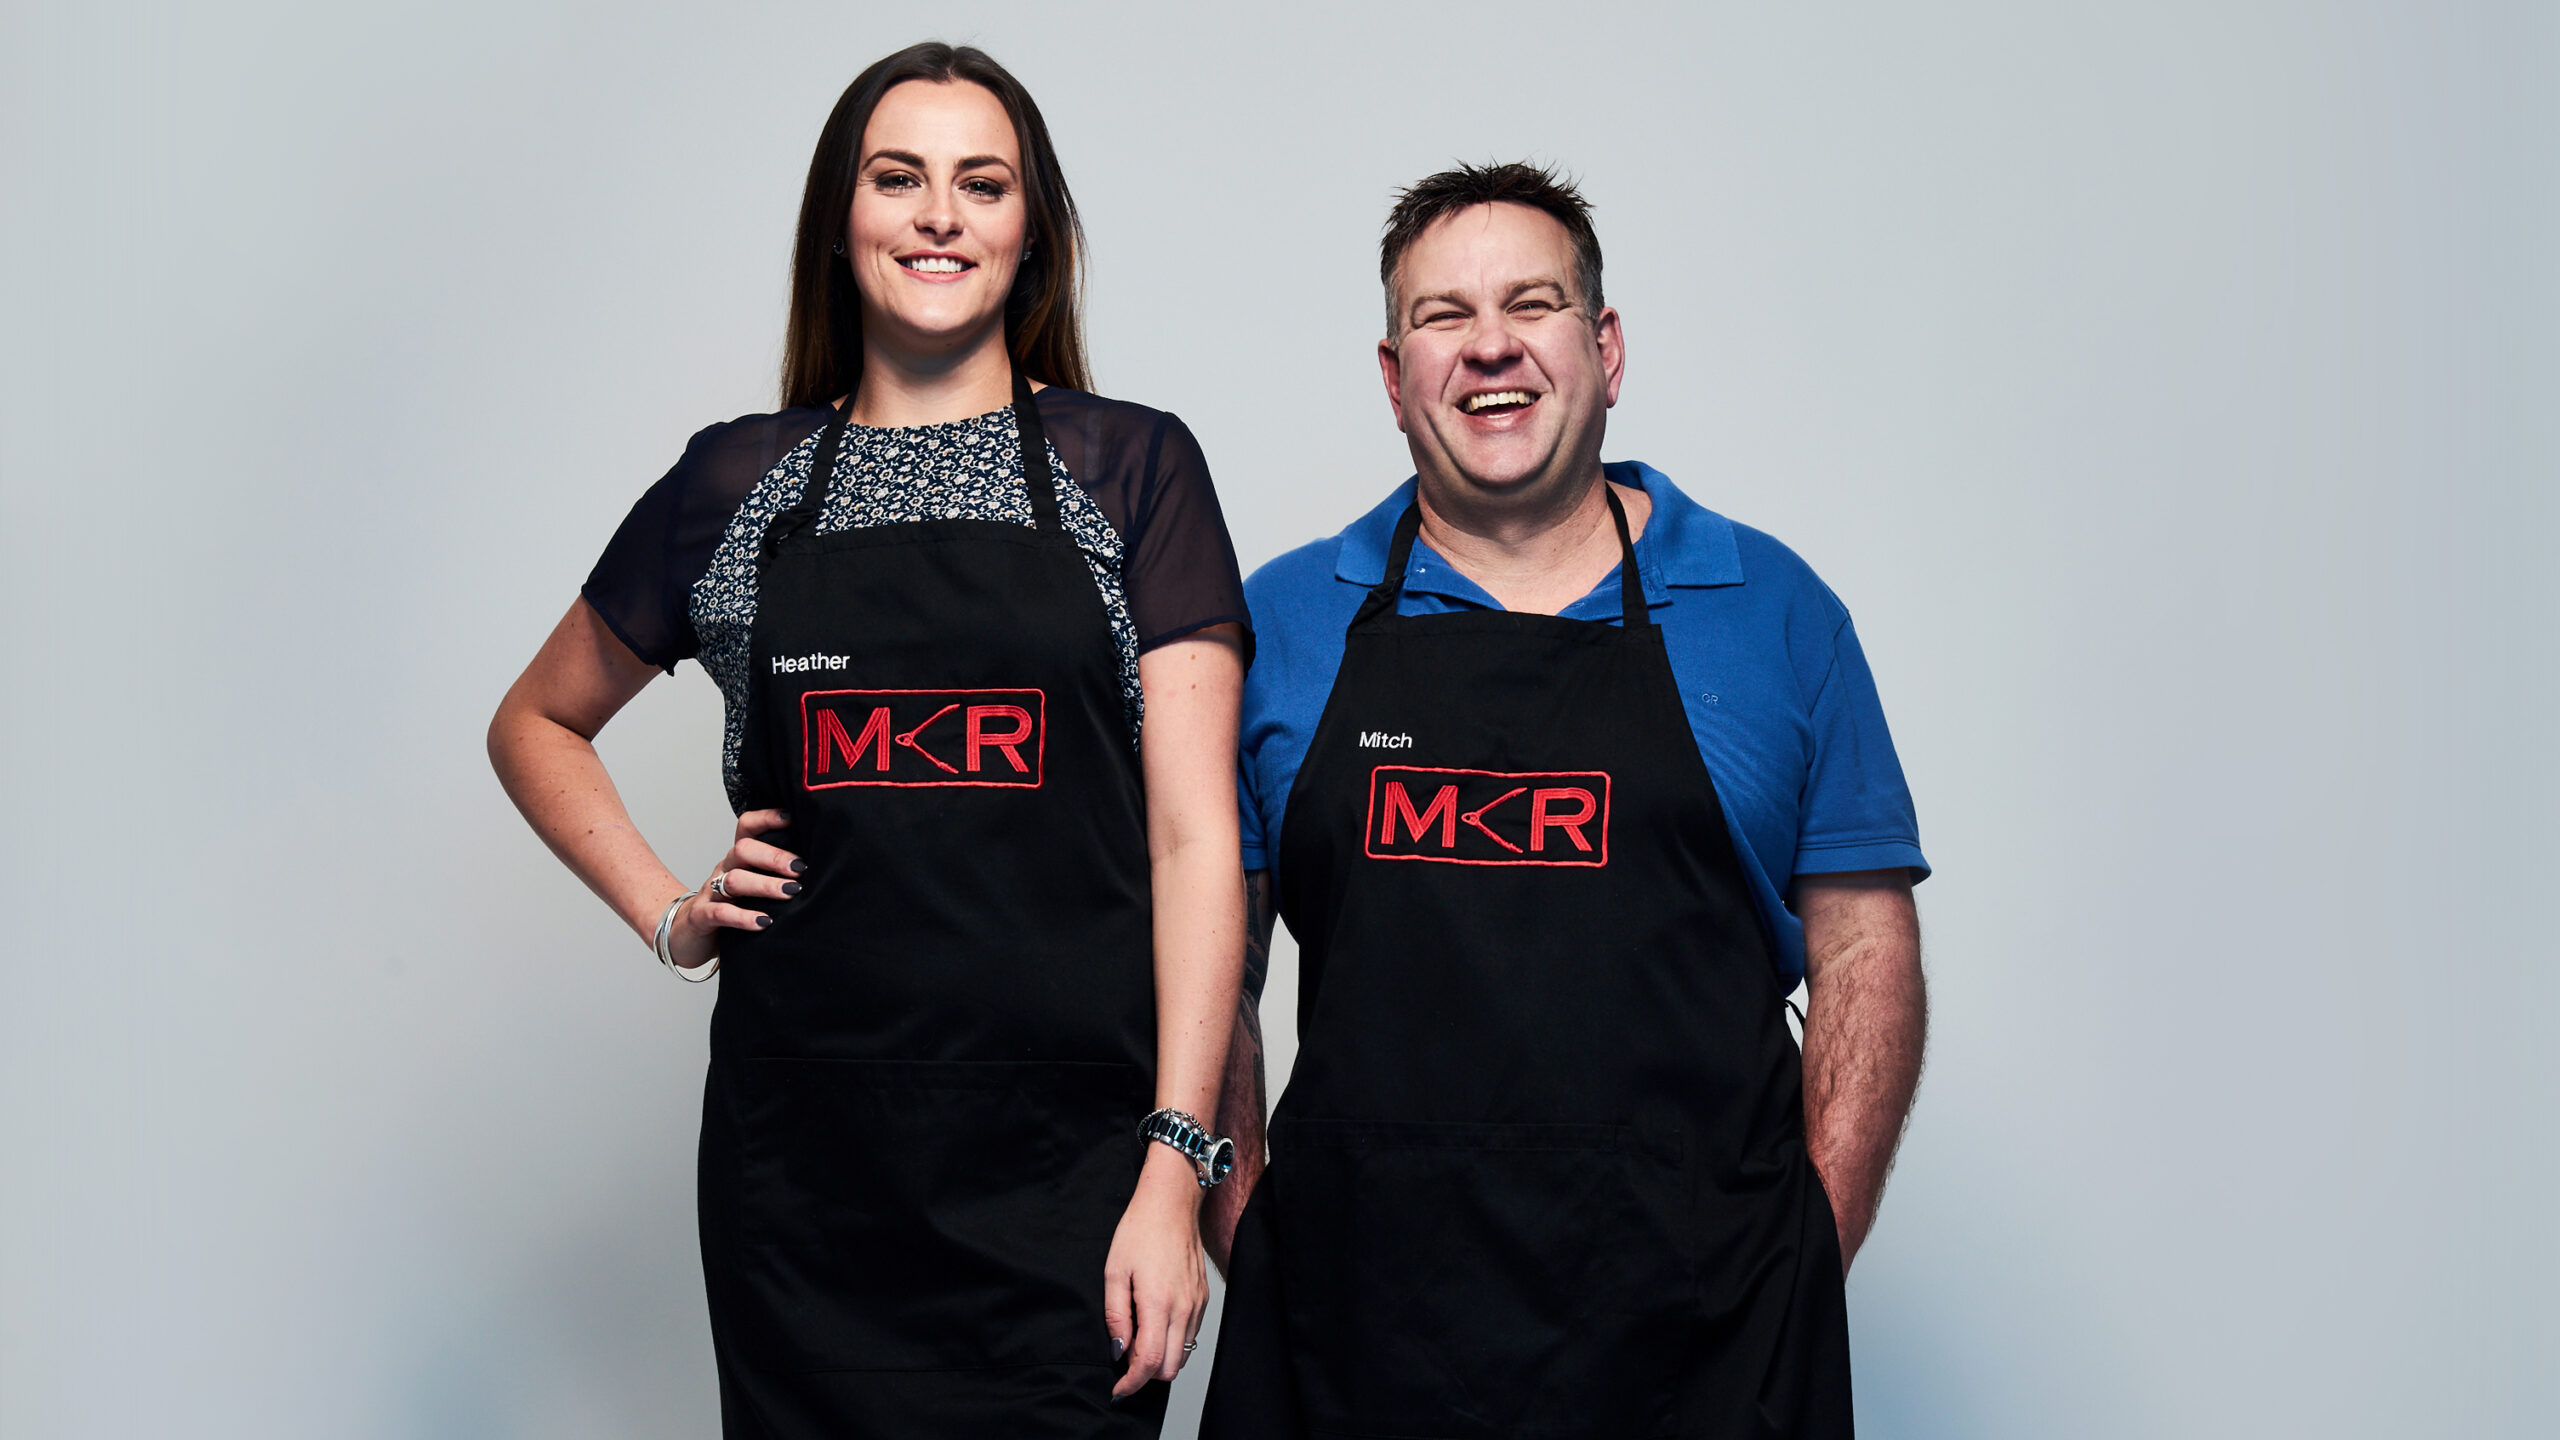 They were portrayed as the villains on MKR NZ – but runners up Heather and Mitch wouldn’t change a thing